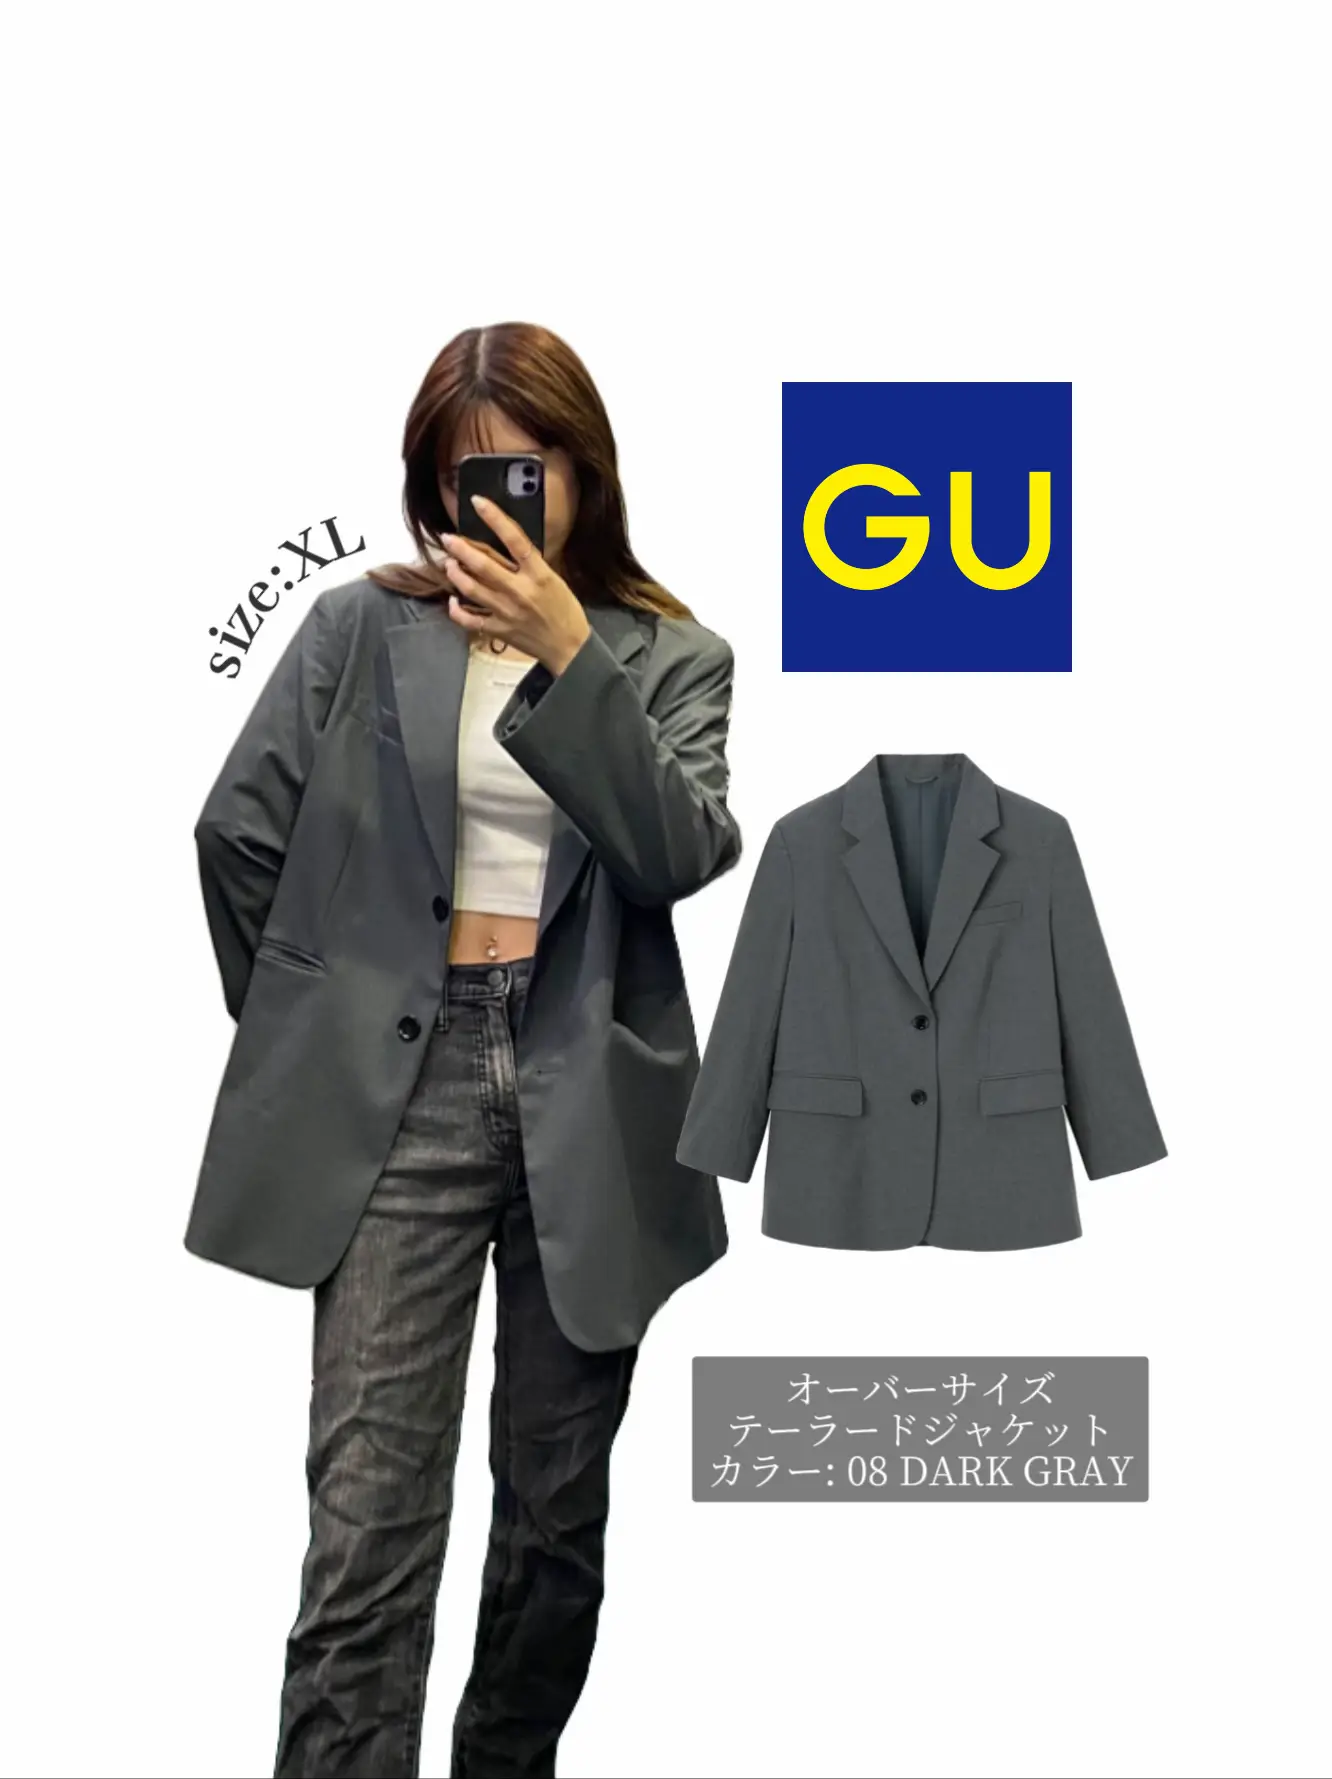 GU 🖤 『 OVERSIZED TAILORED JACKET 』 | Gallery posted by ami